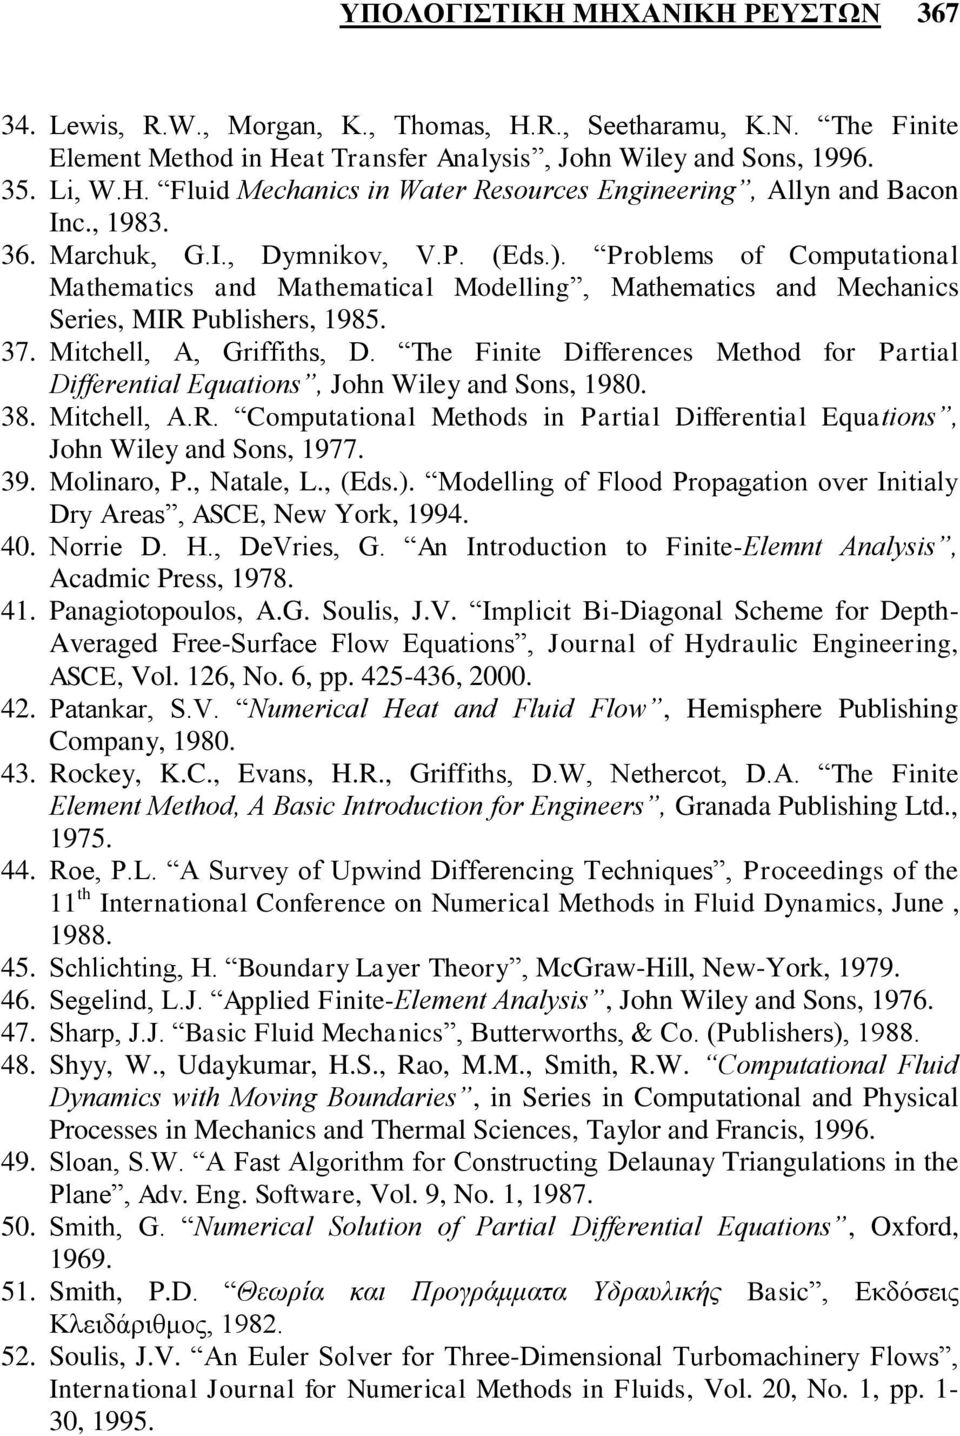 Mitchell, A, Griffiths, D. The Finite Differences Method for Partial Differential Equations, John Wiley and Sons, 1980. 38. Mitchell, A.R.